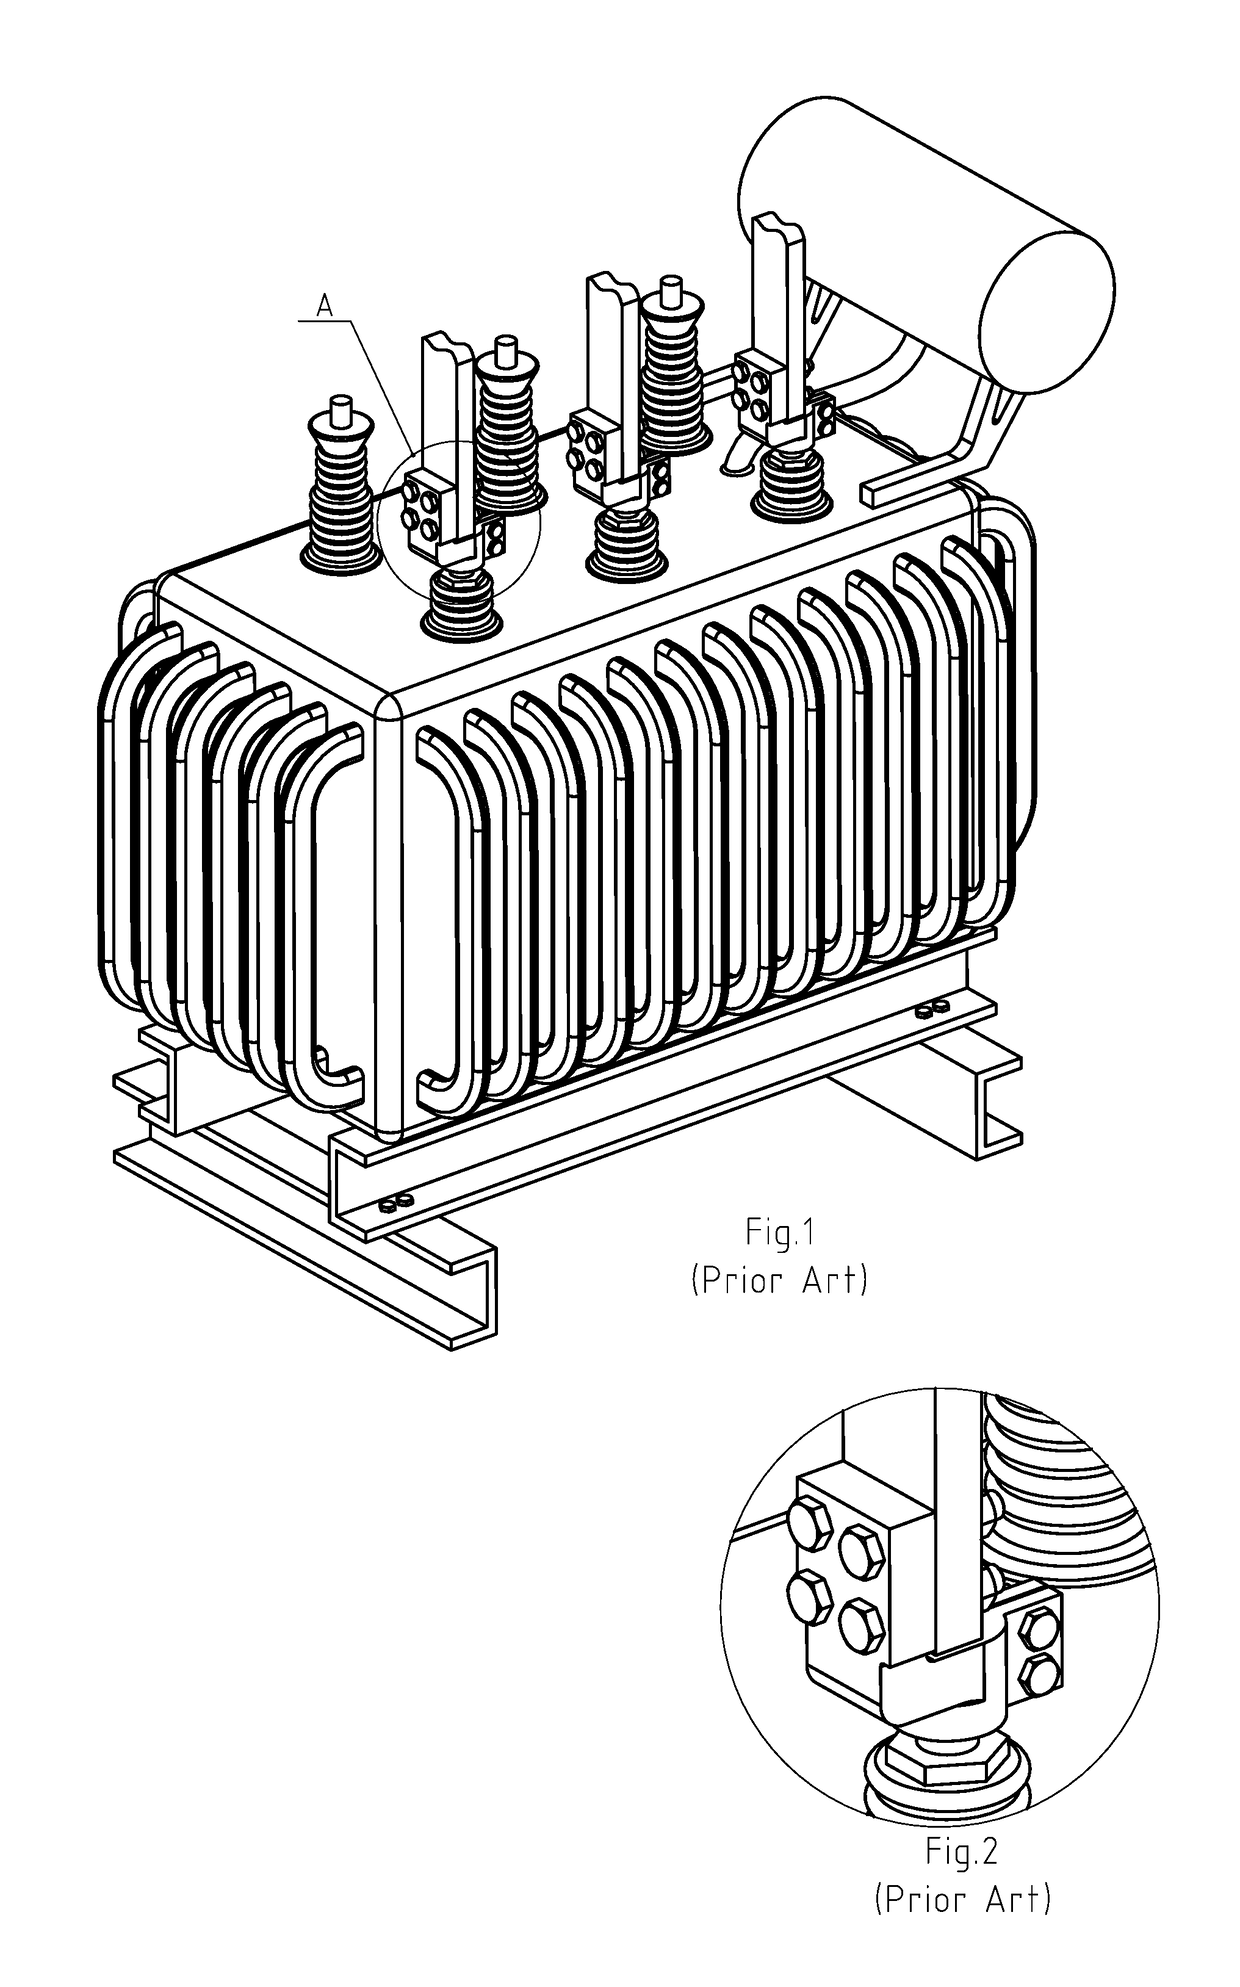 Output of low-voltage-side of transformer